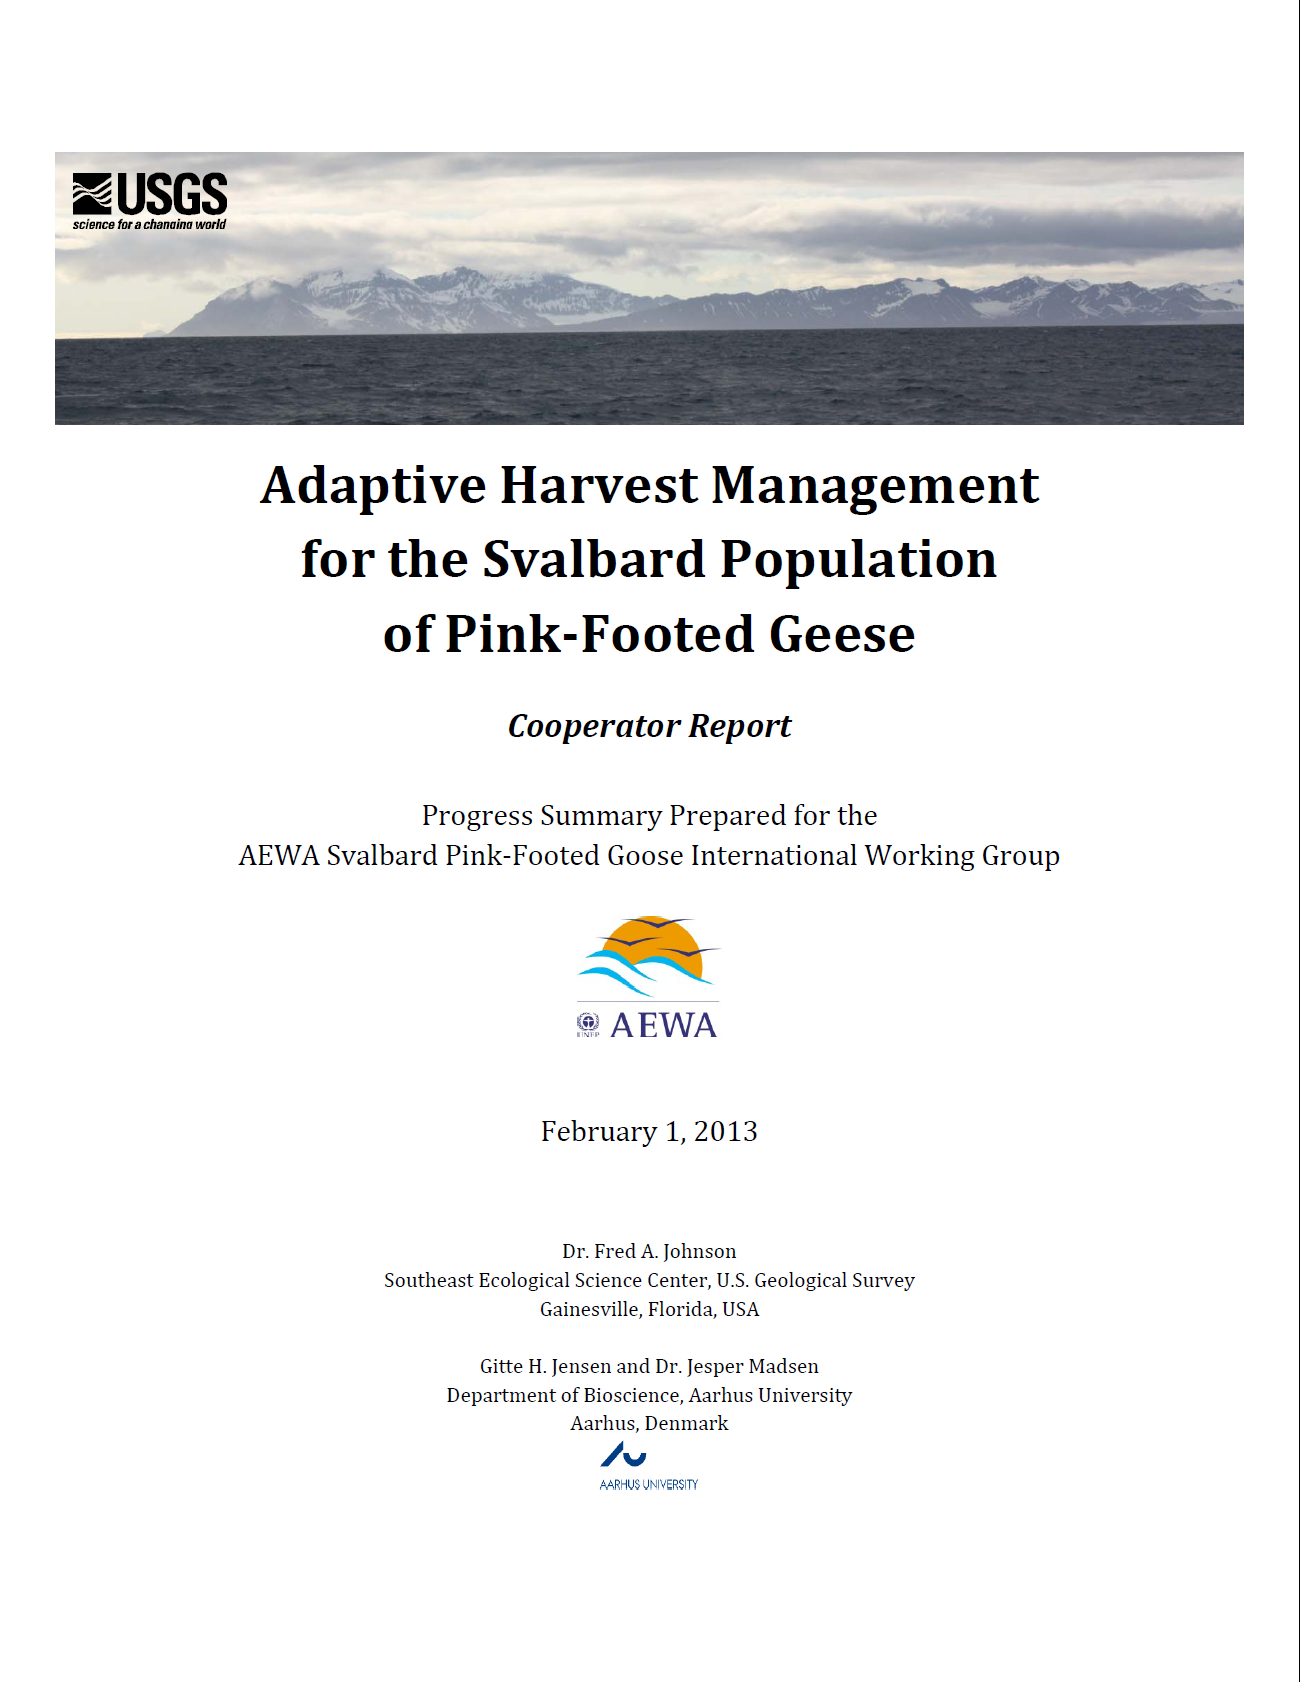 Adaptive Harvest Management Cooperator Report, front cover